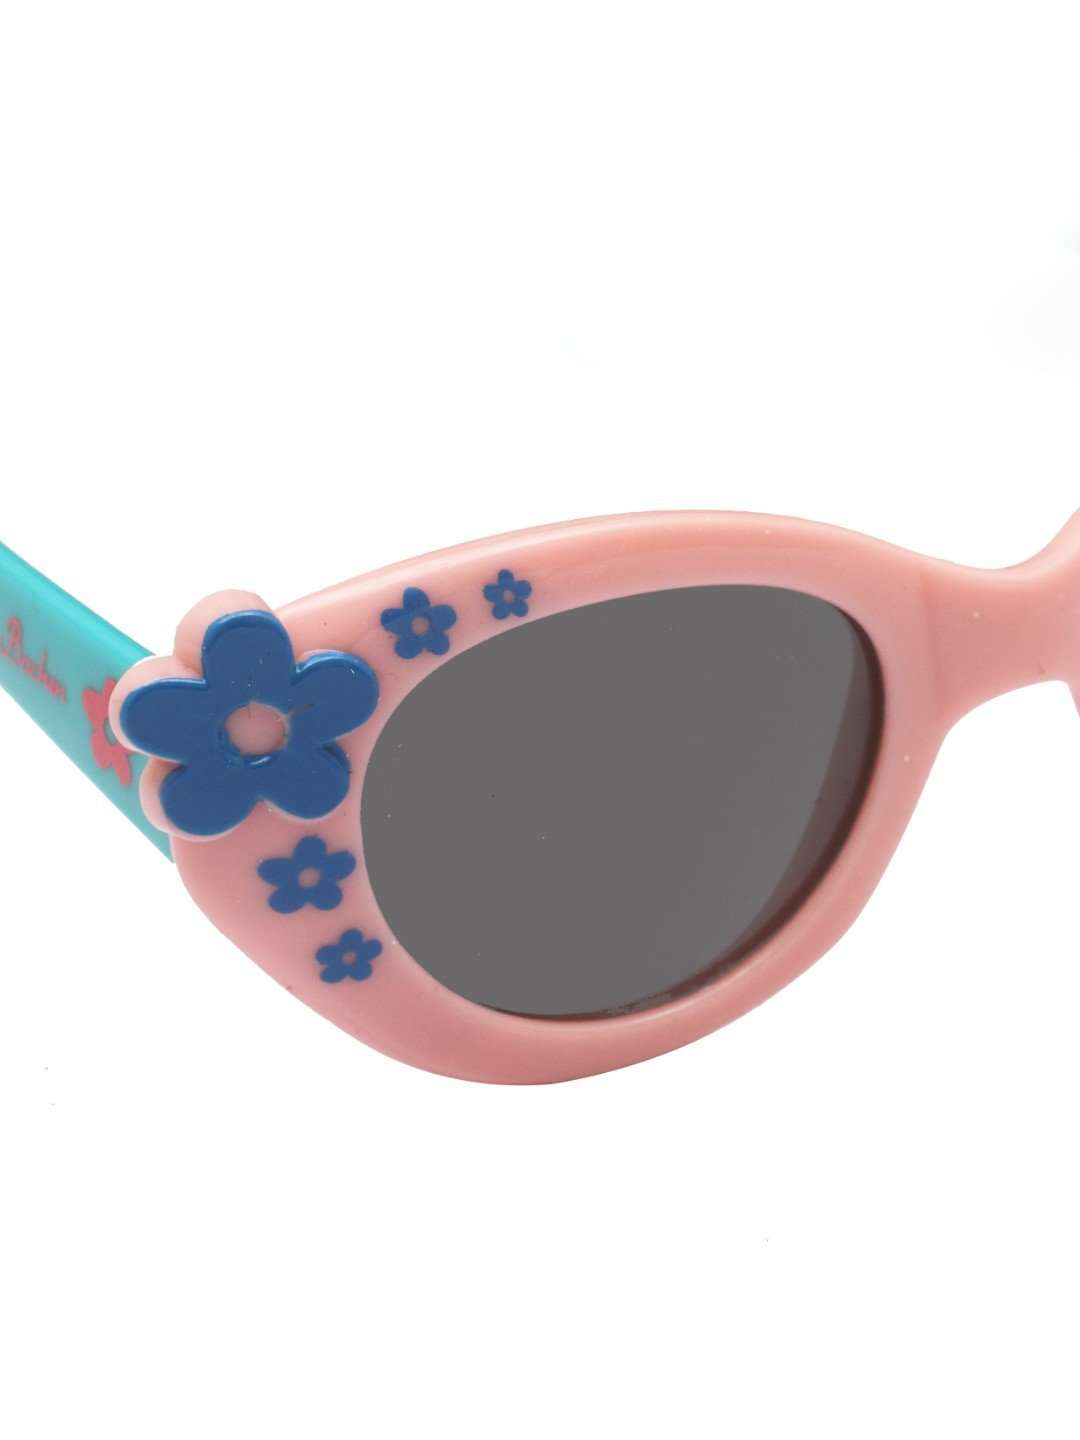 Stol'n Kids Pink and Blue Flower Cat Eye Sunglasses - SWHF